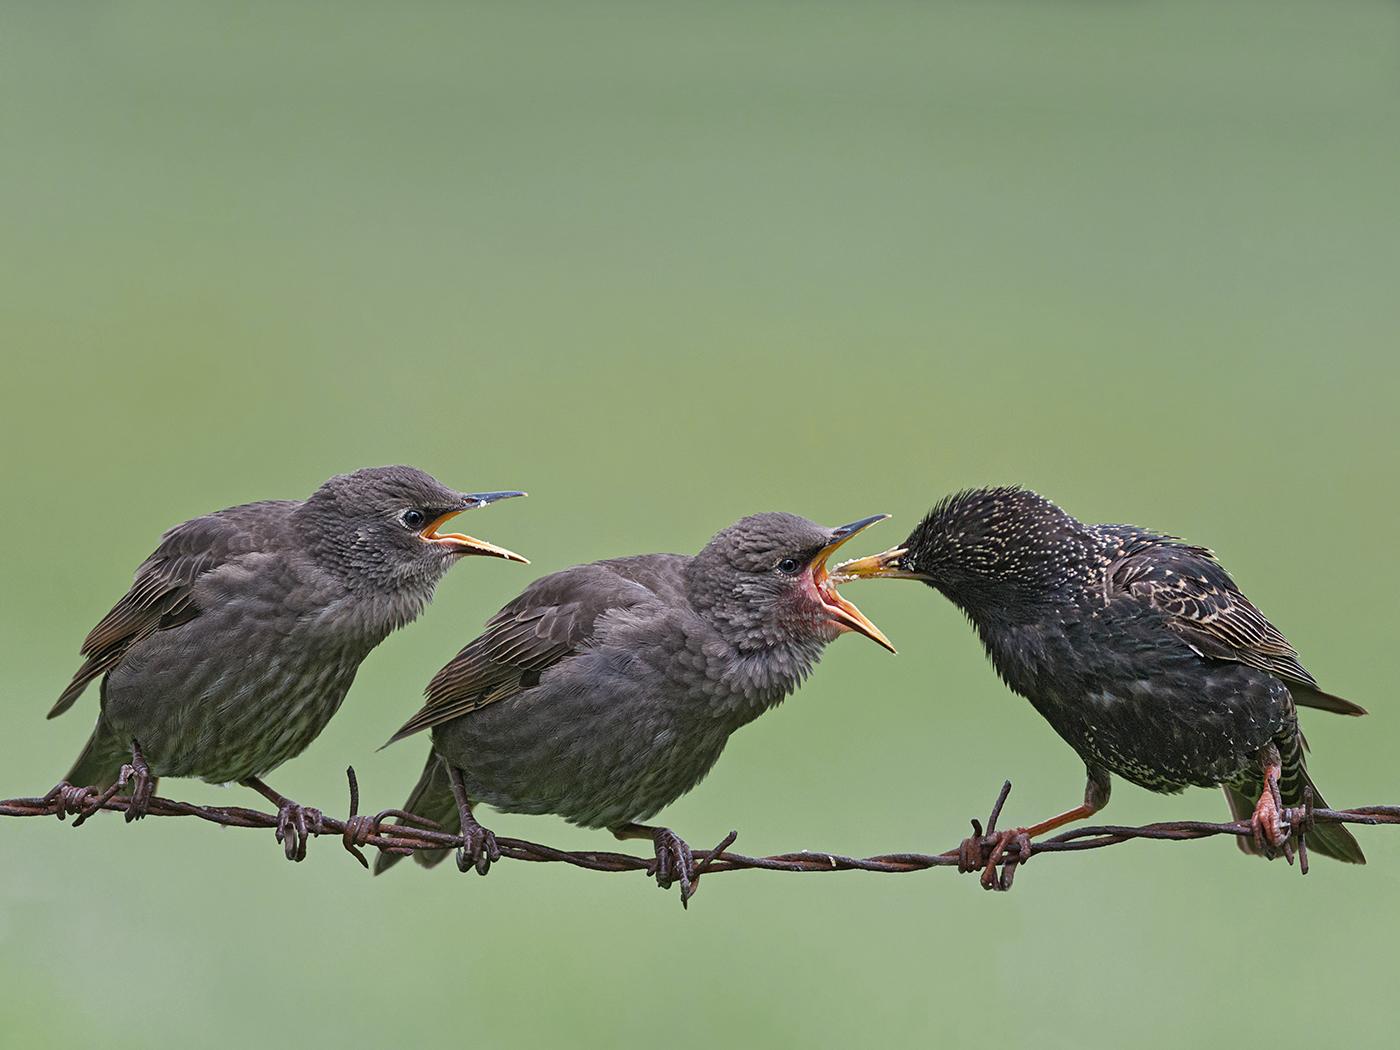 X birds. Everything in the World Starling. The Starling Results meaning. Starlings meaning. Crowd Birds photo.